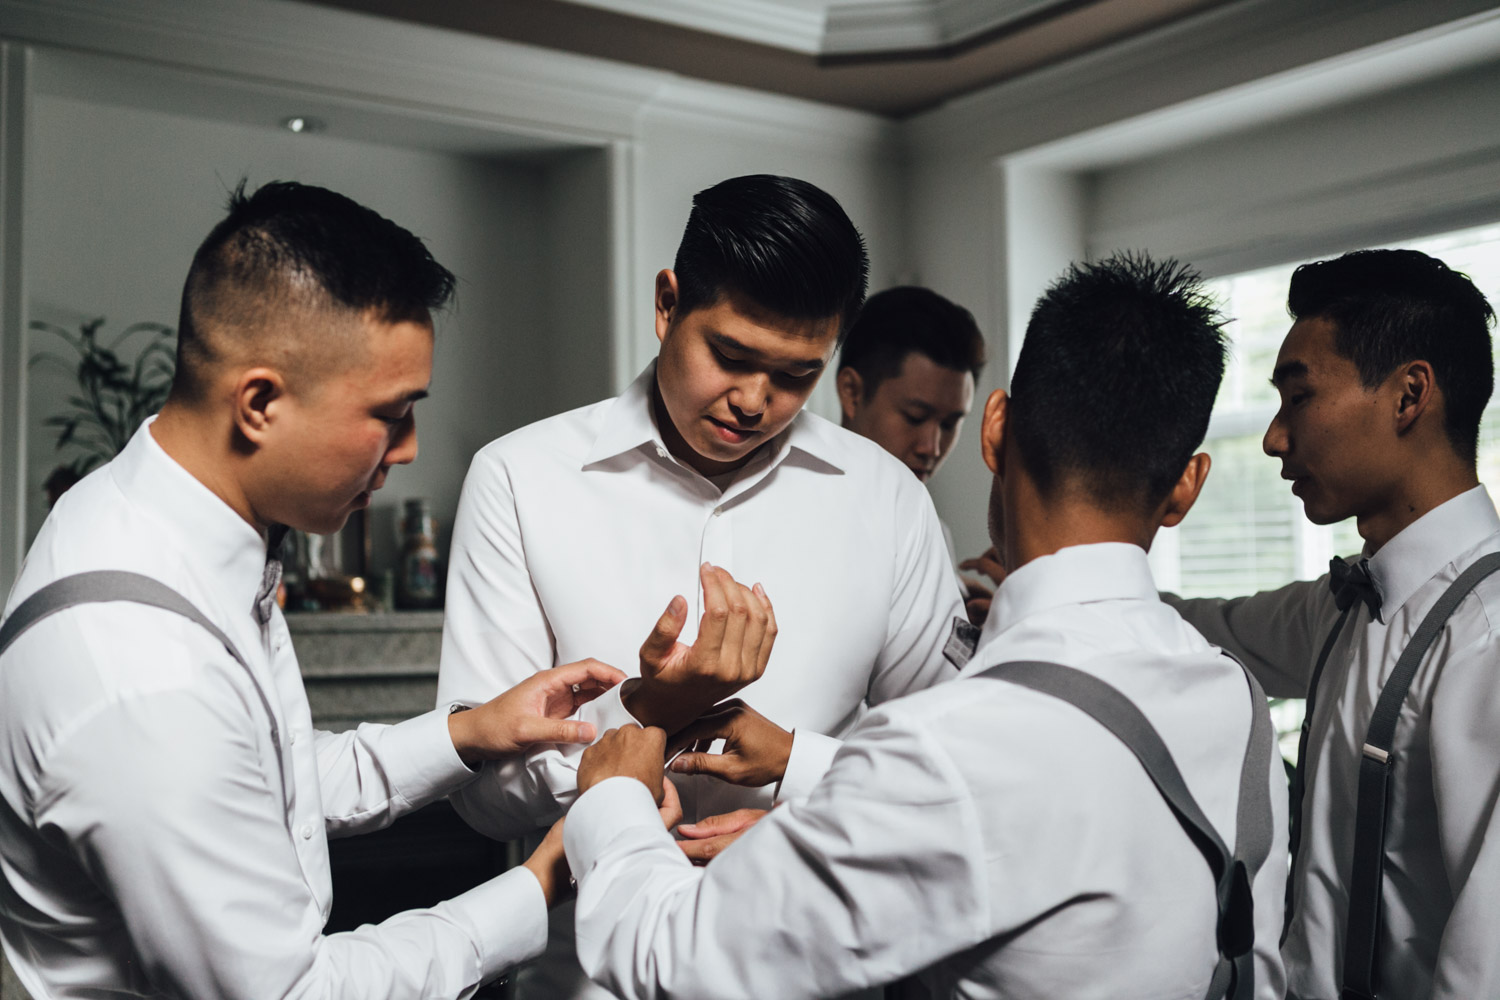 groom getting ready for wedding photography in vancouver bc